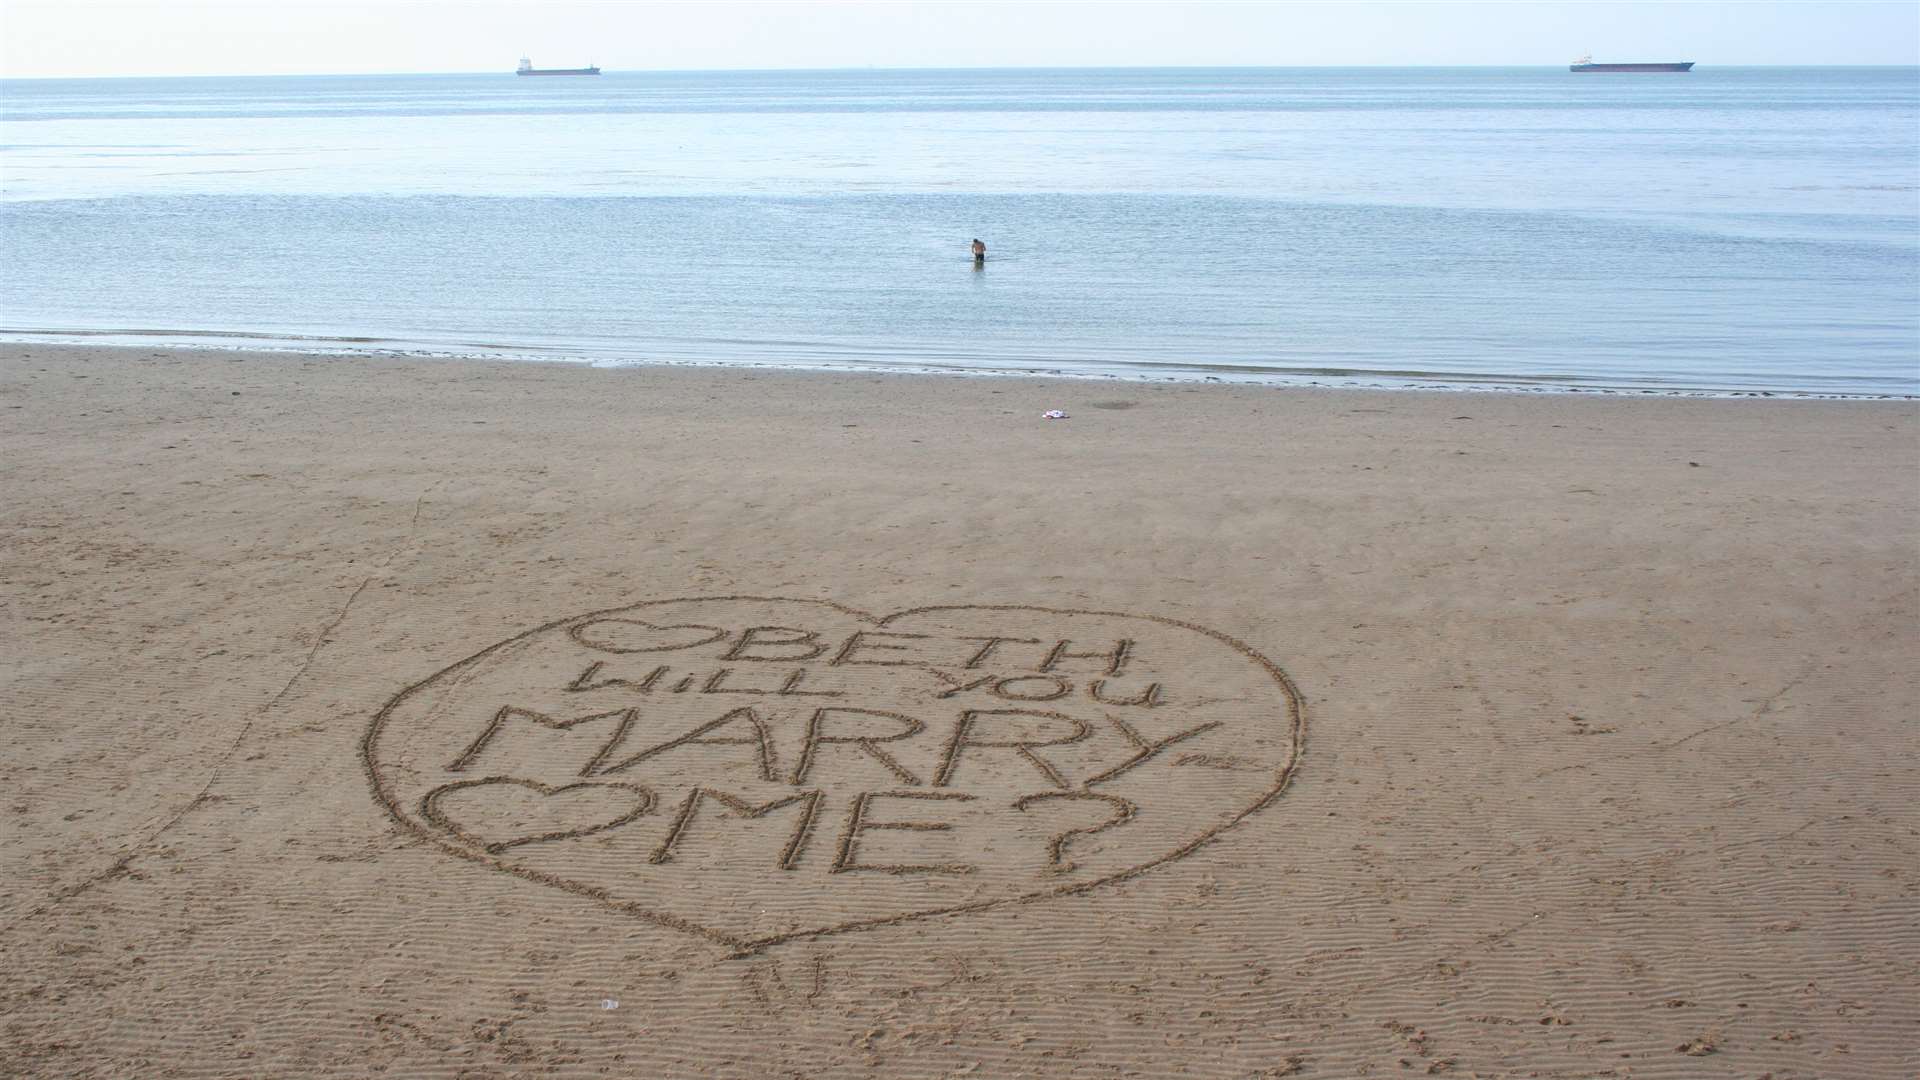 The marriage proposal written in the sand.